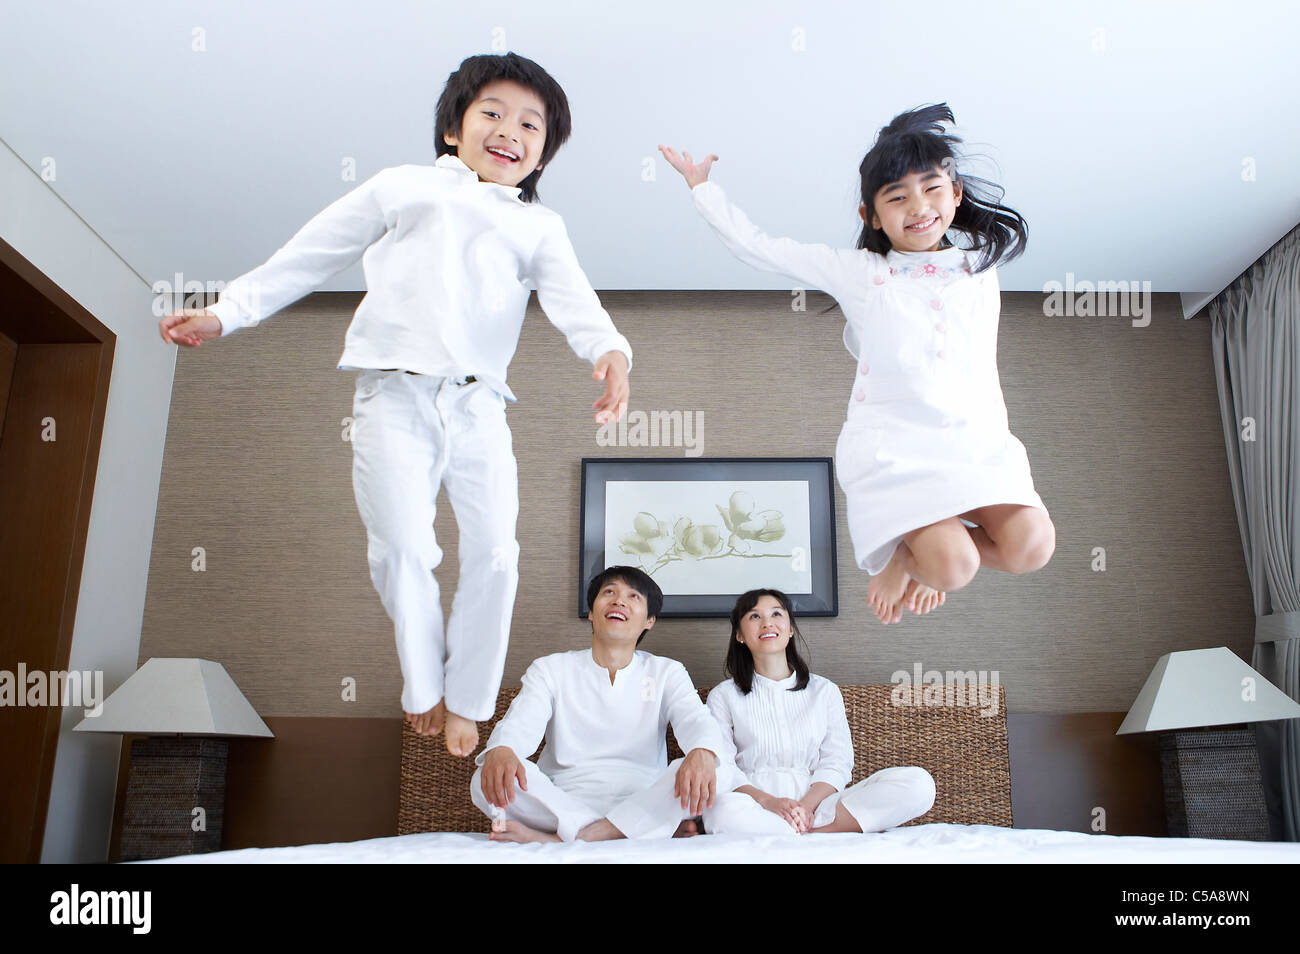 Portrait of children jumping on bed, while parents looking Stock Photo